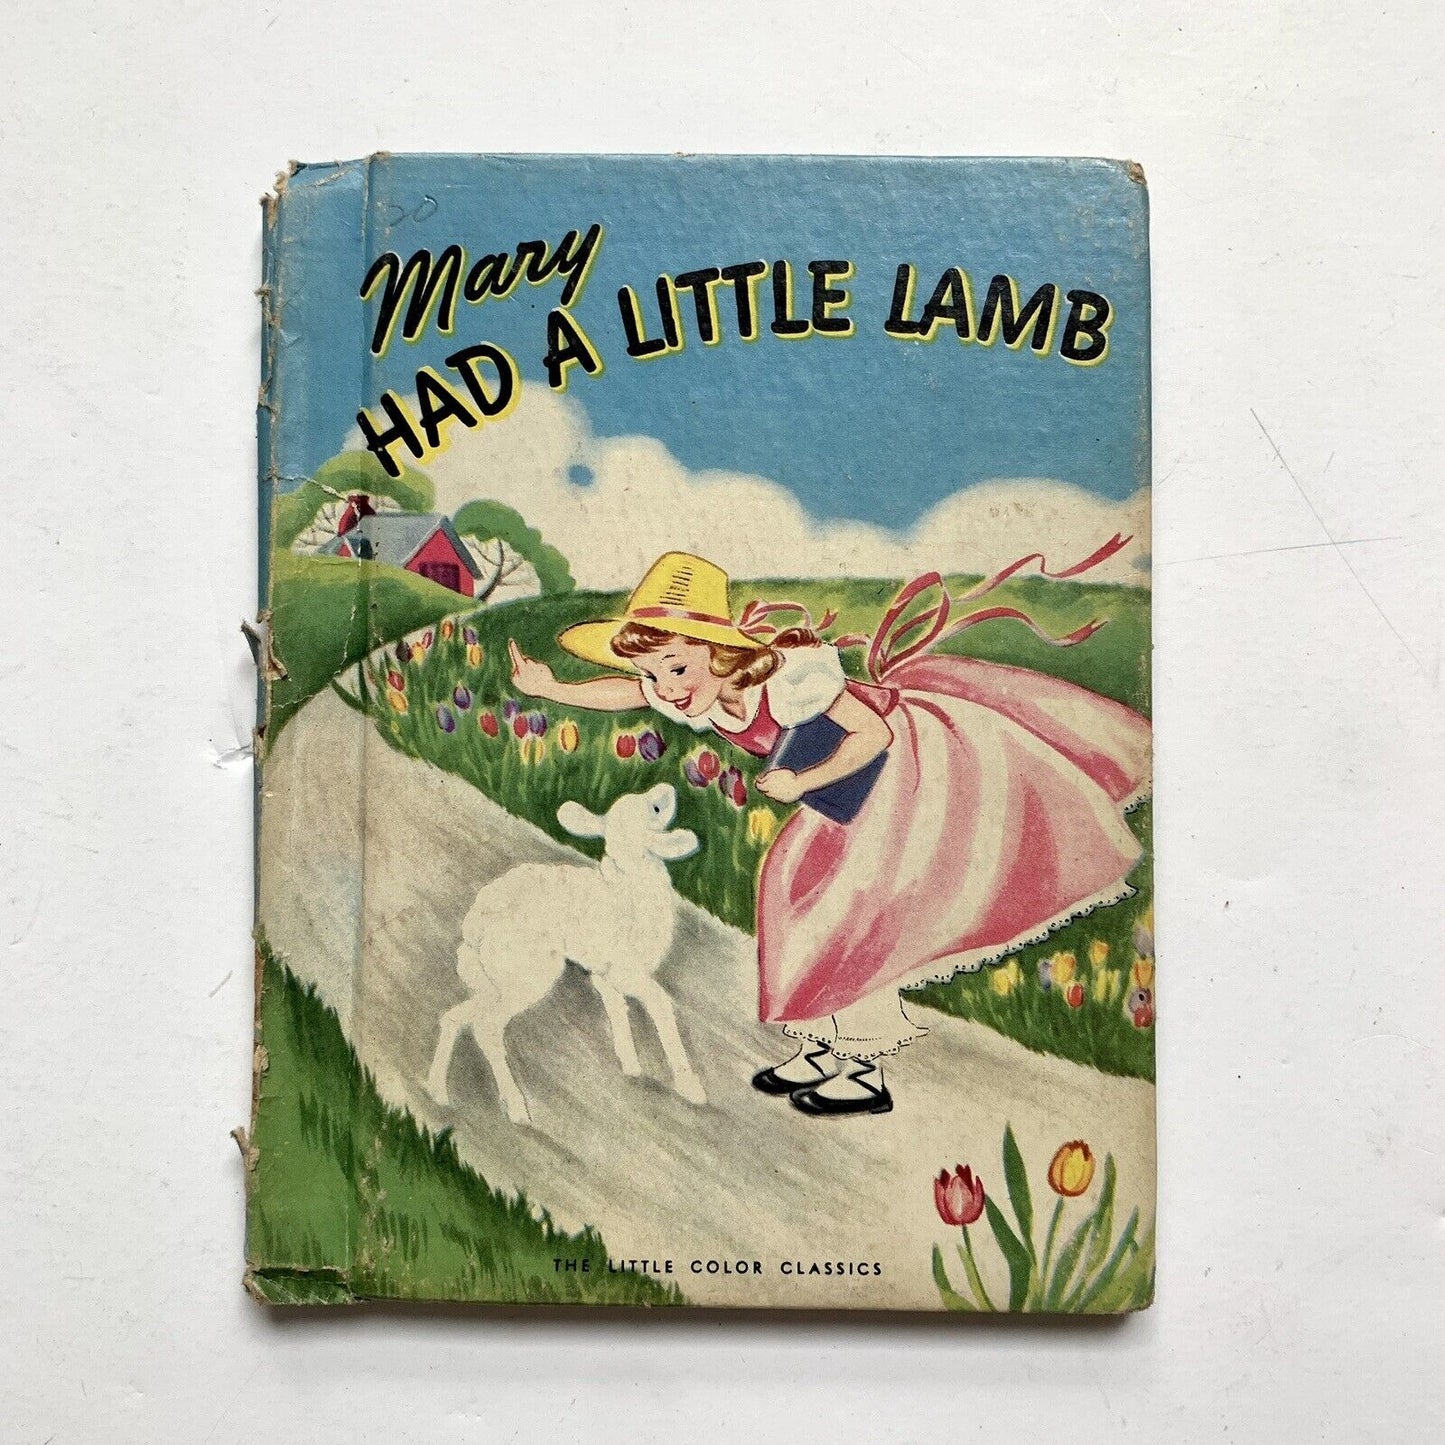 1938 Vintage Mary Had A Little Lamb Book